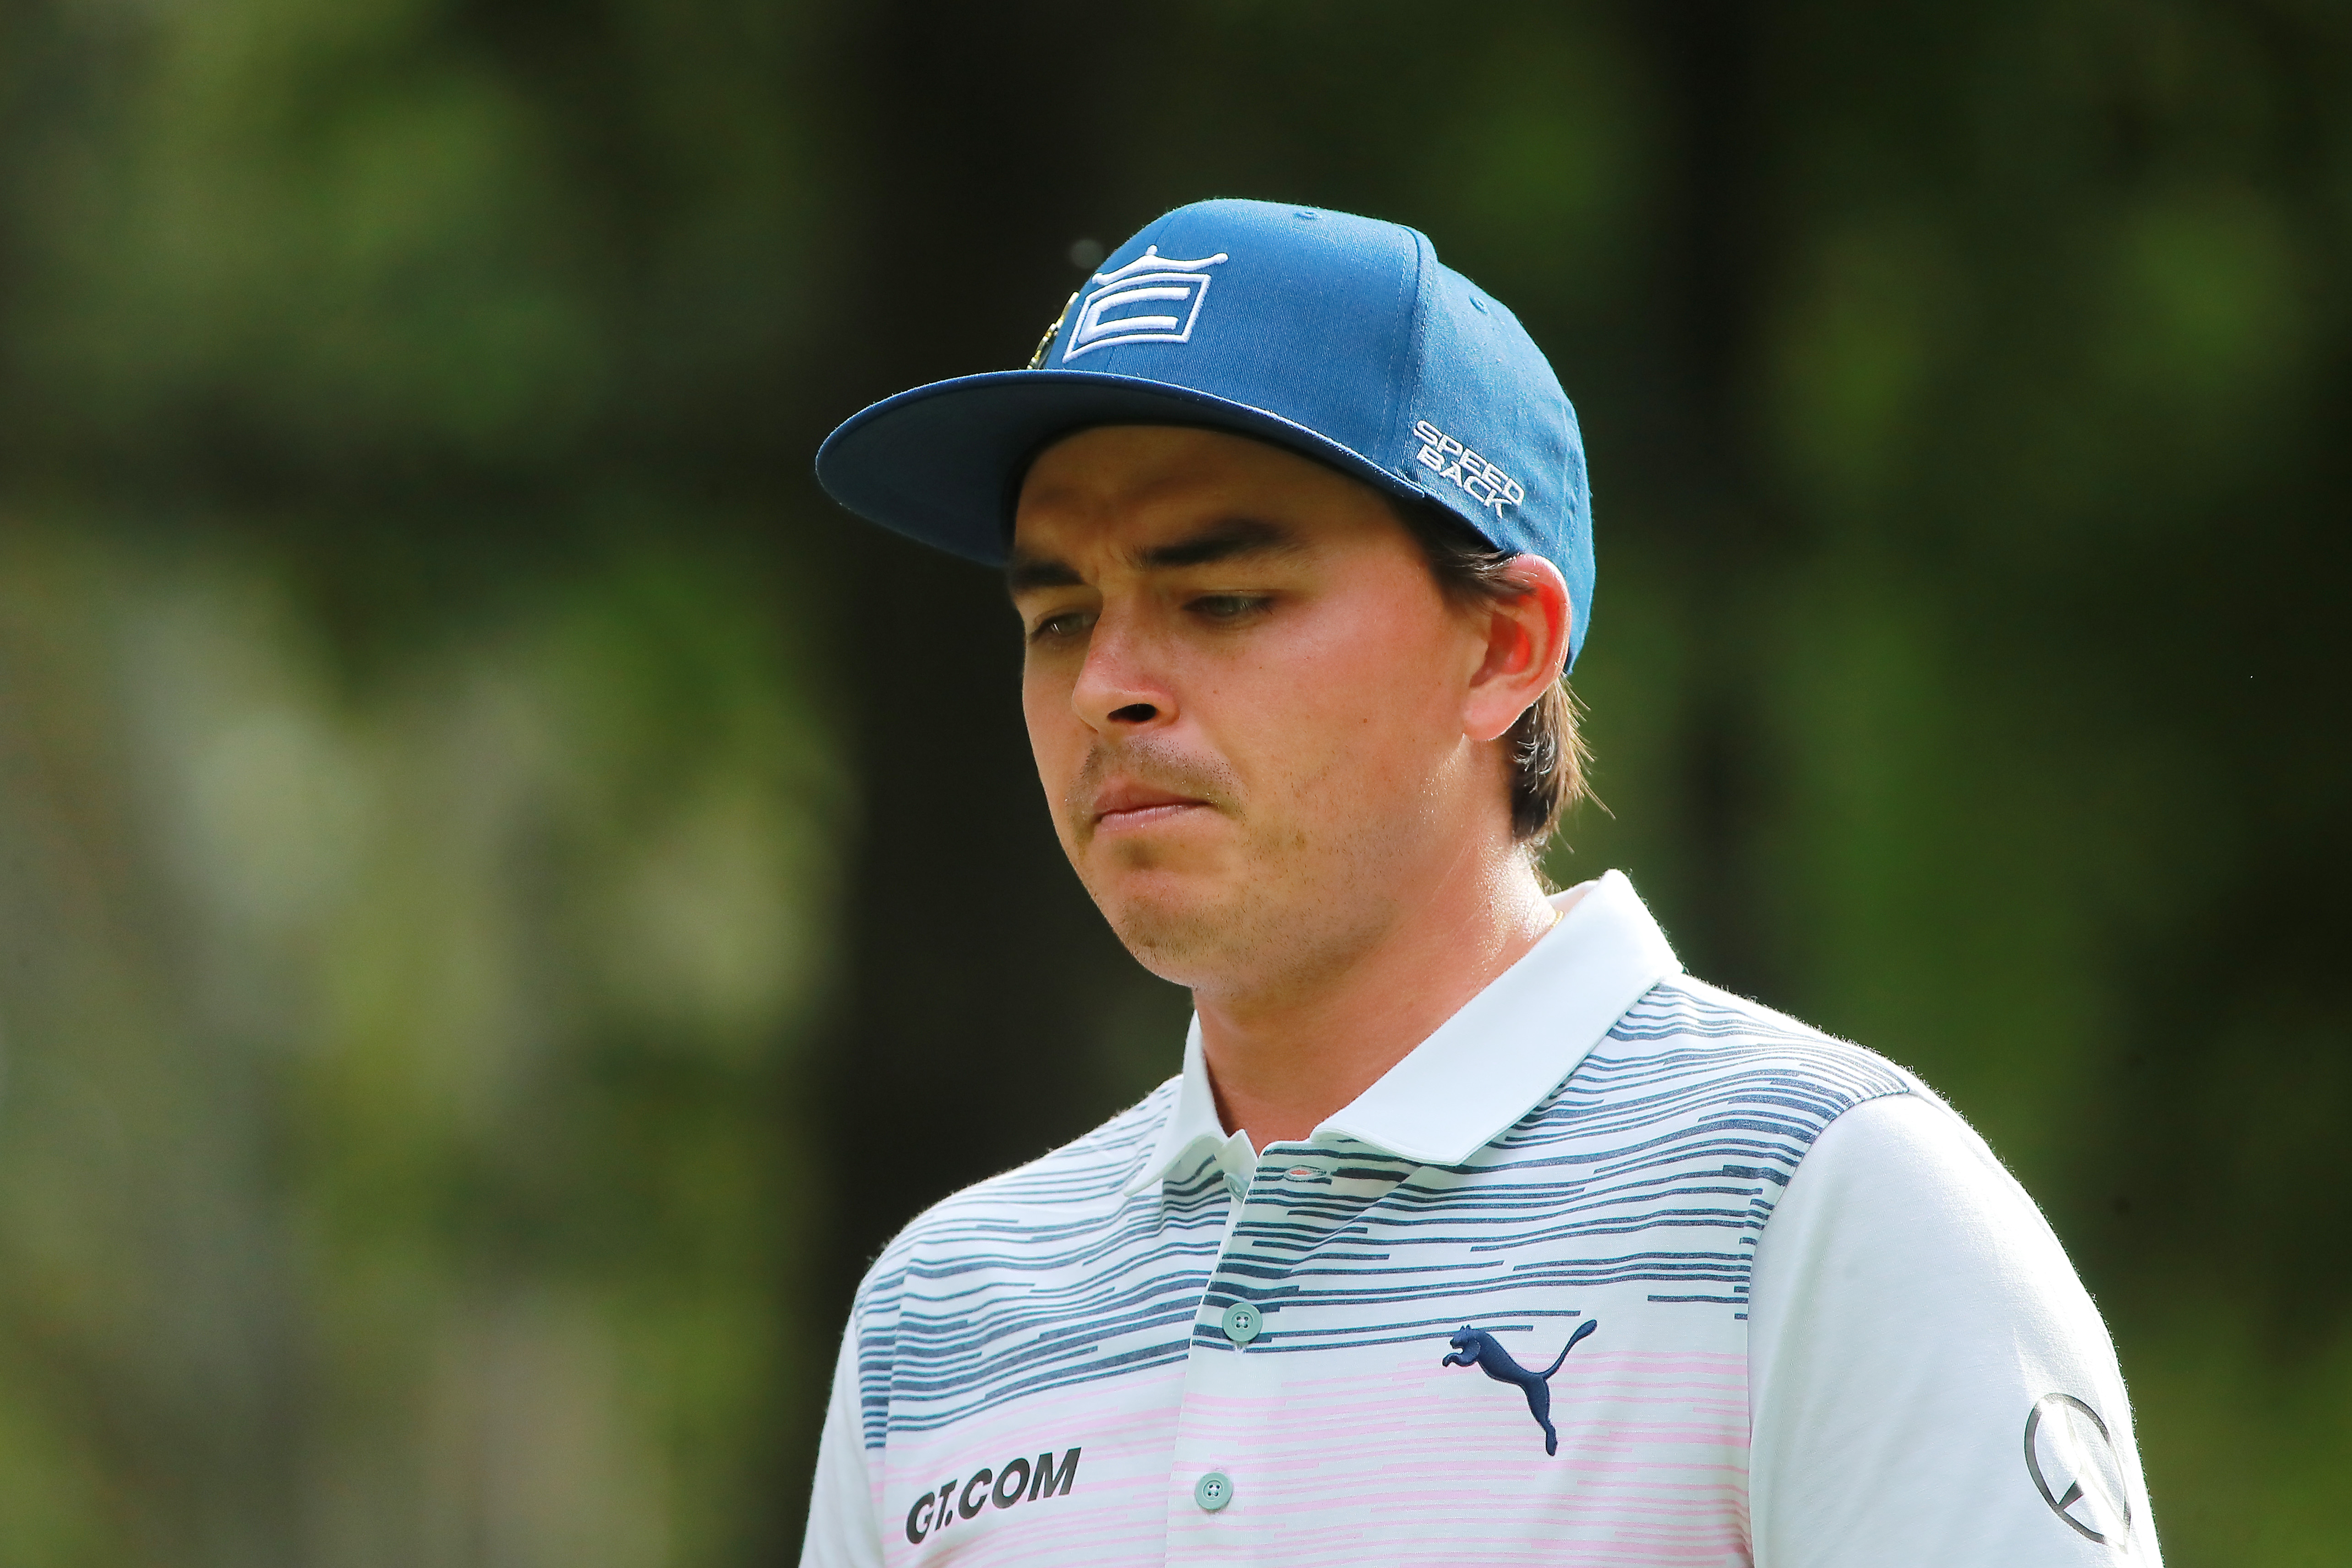 Rickie Fowler fell foul of the new drop rule in the WGC Mexico Championship at the weekend.